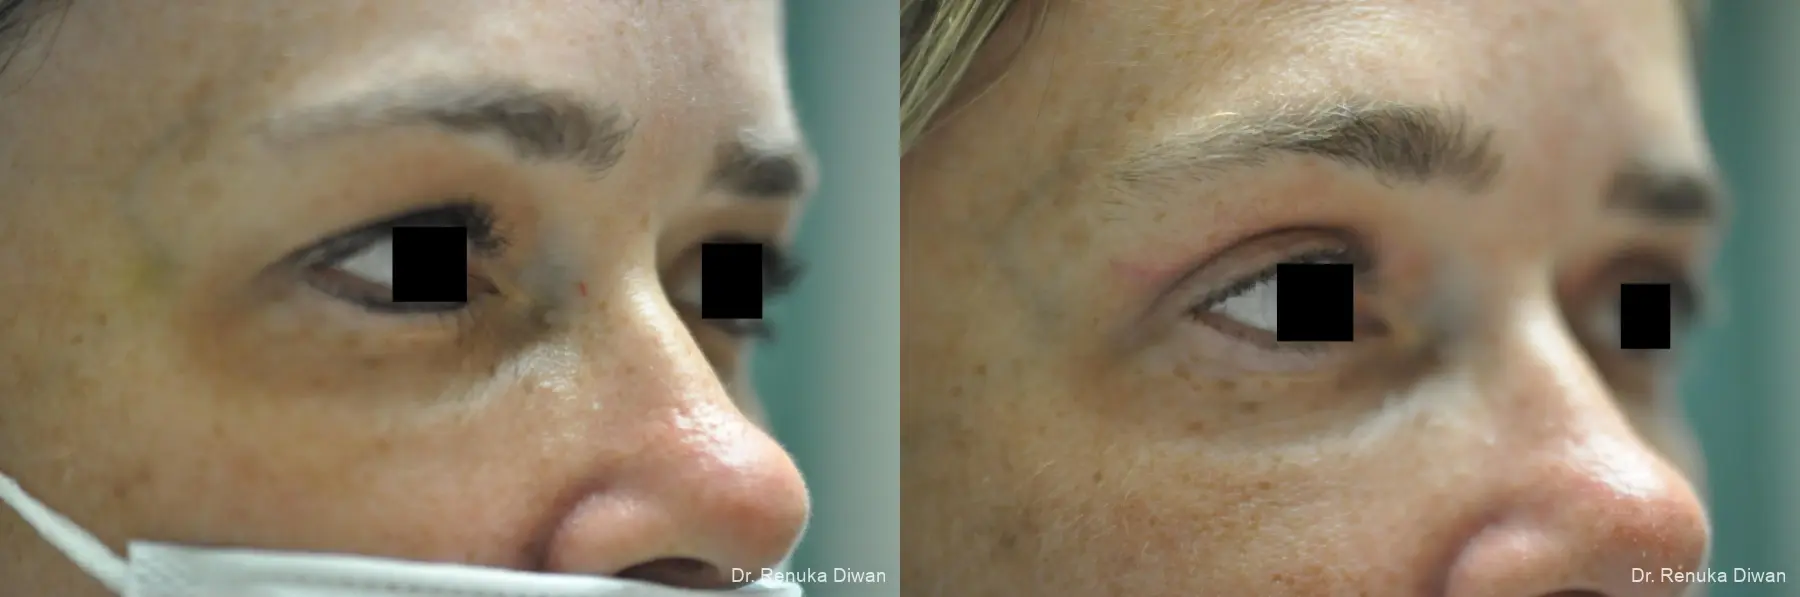 Blepharoplasty: Patient 3 - Before and After 5